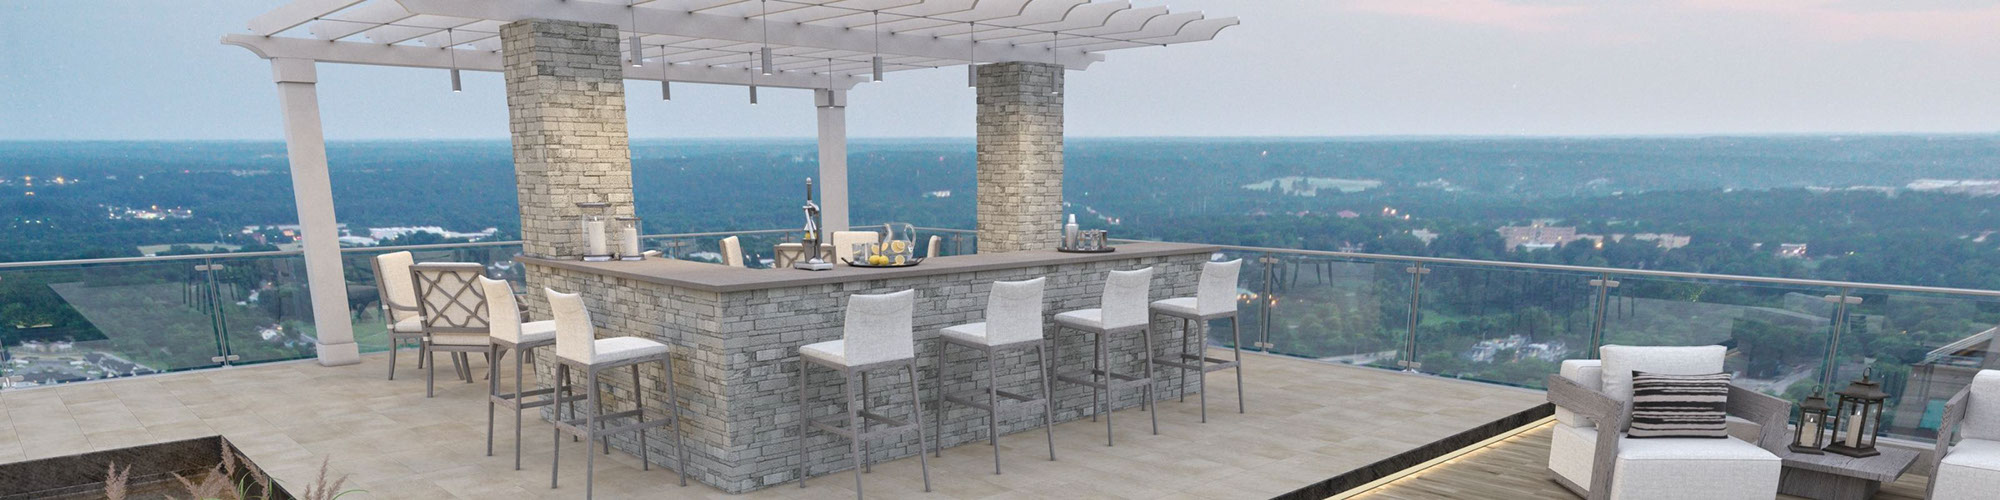 Rooftop patio with stacked stone-faced bar under a pergola, wood look slip-resistant floor tile, and gray paver walkway set in grass.